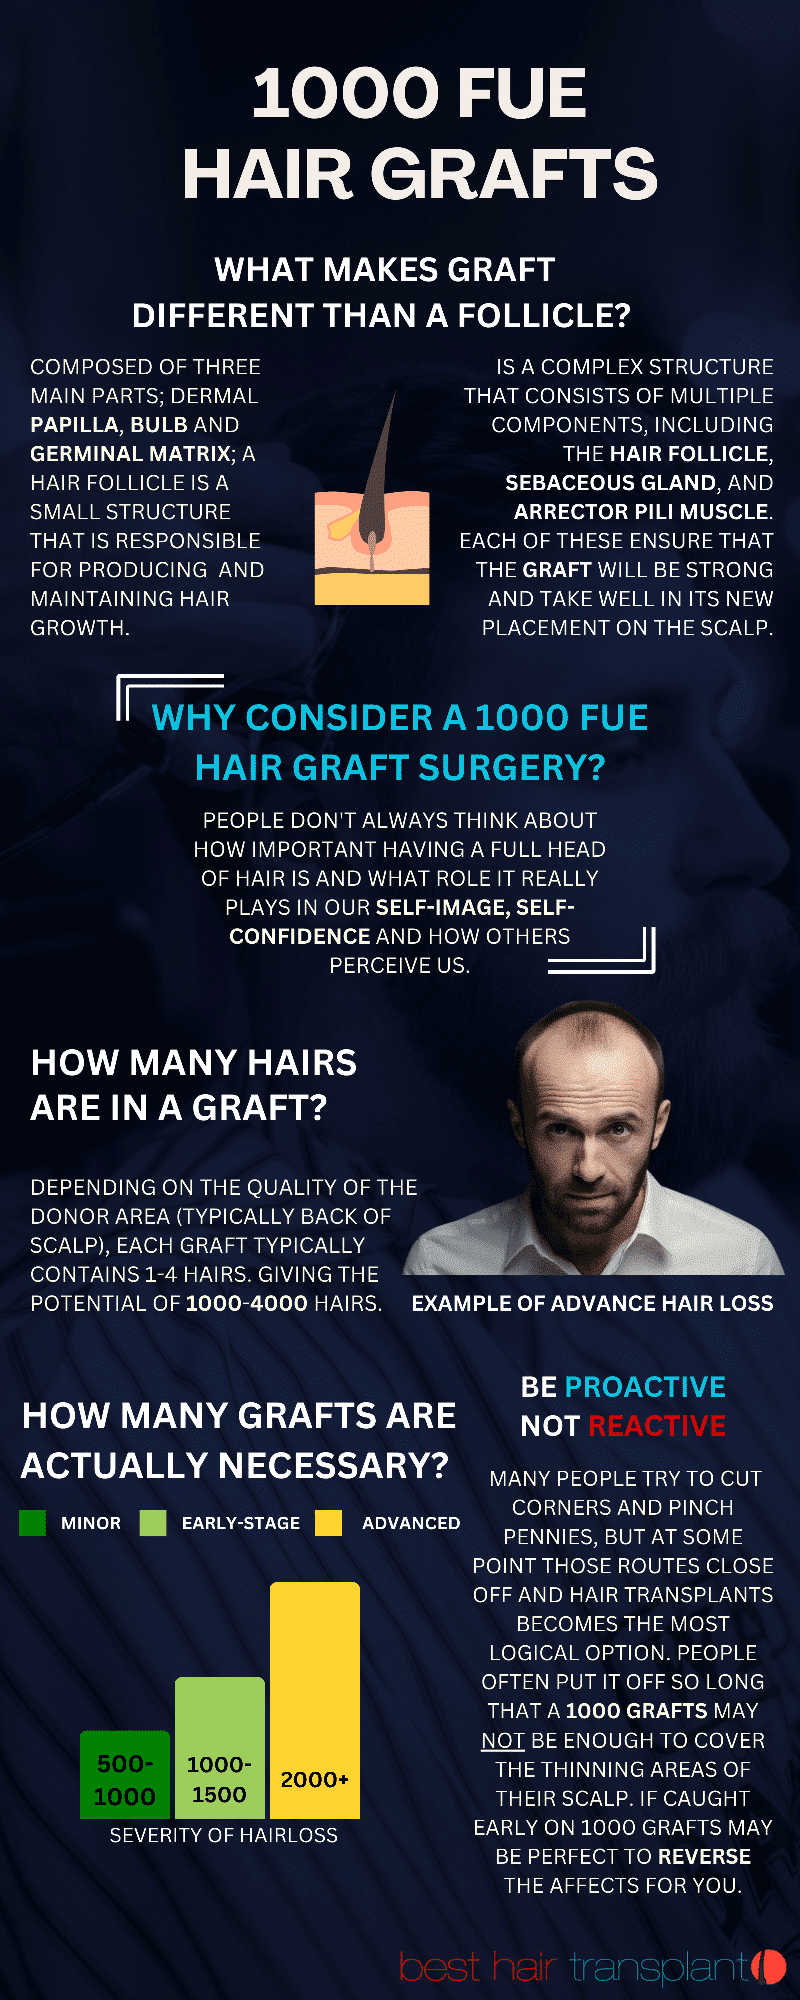 1000 FUE hair grafts - What makes a graft different than a follicle?